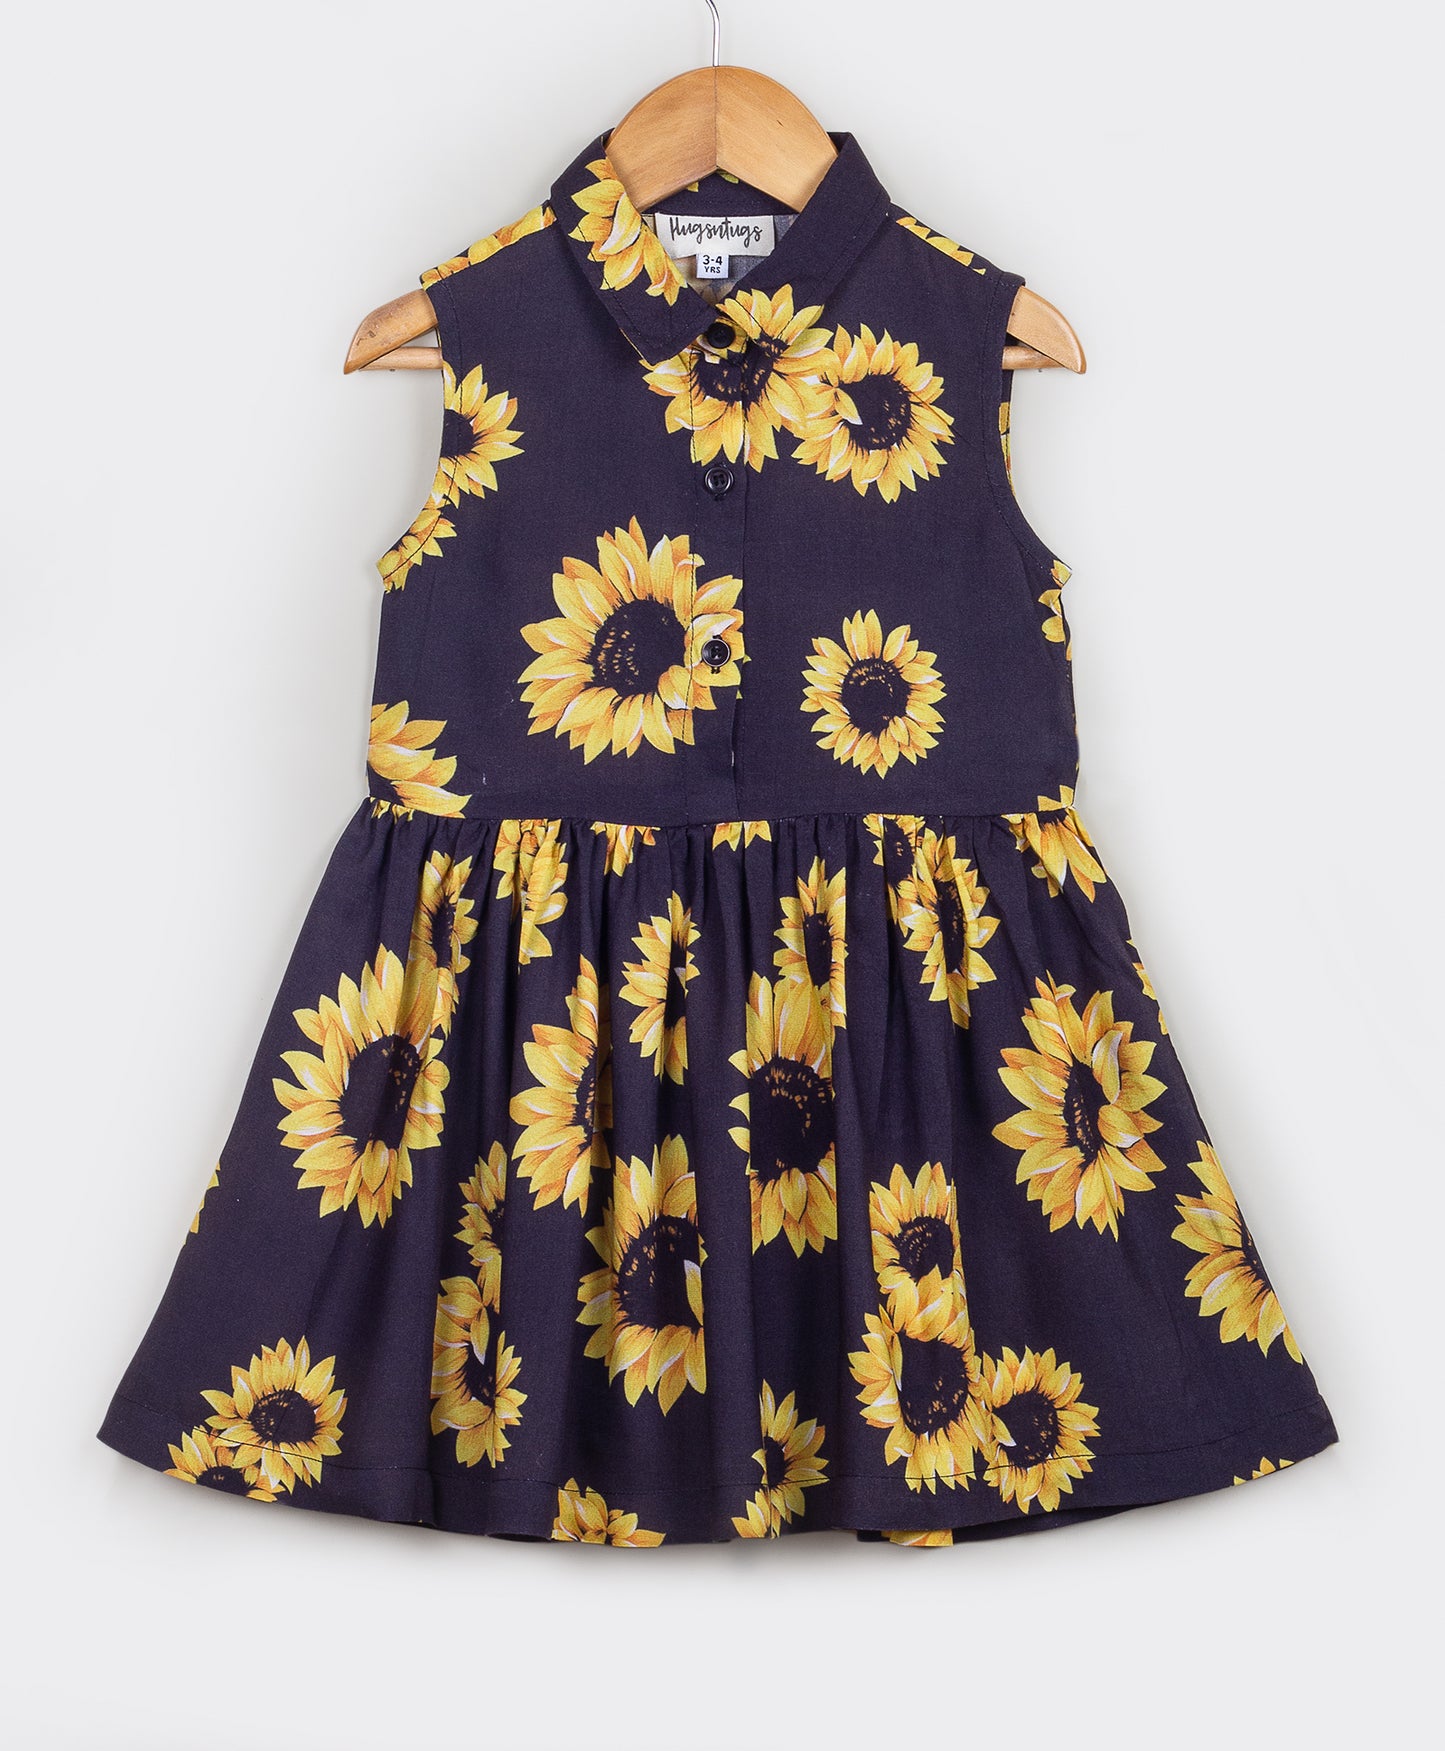 All over sunflower print dress with front button closure